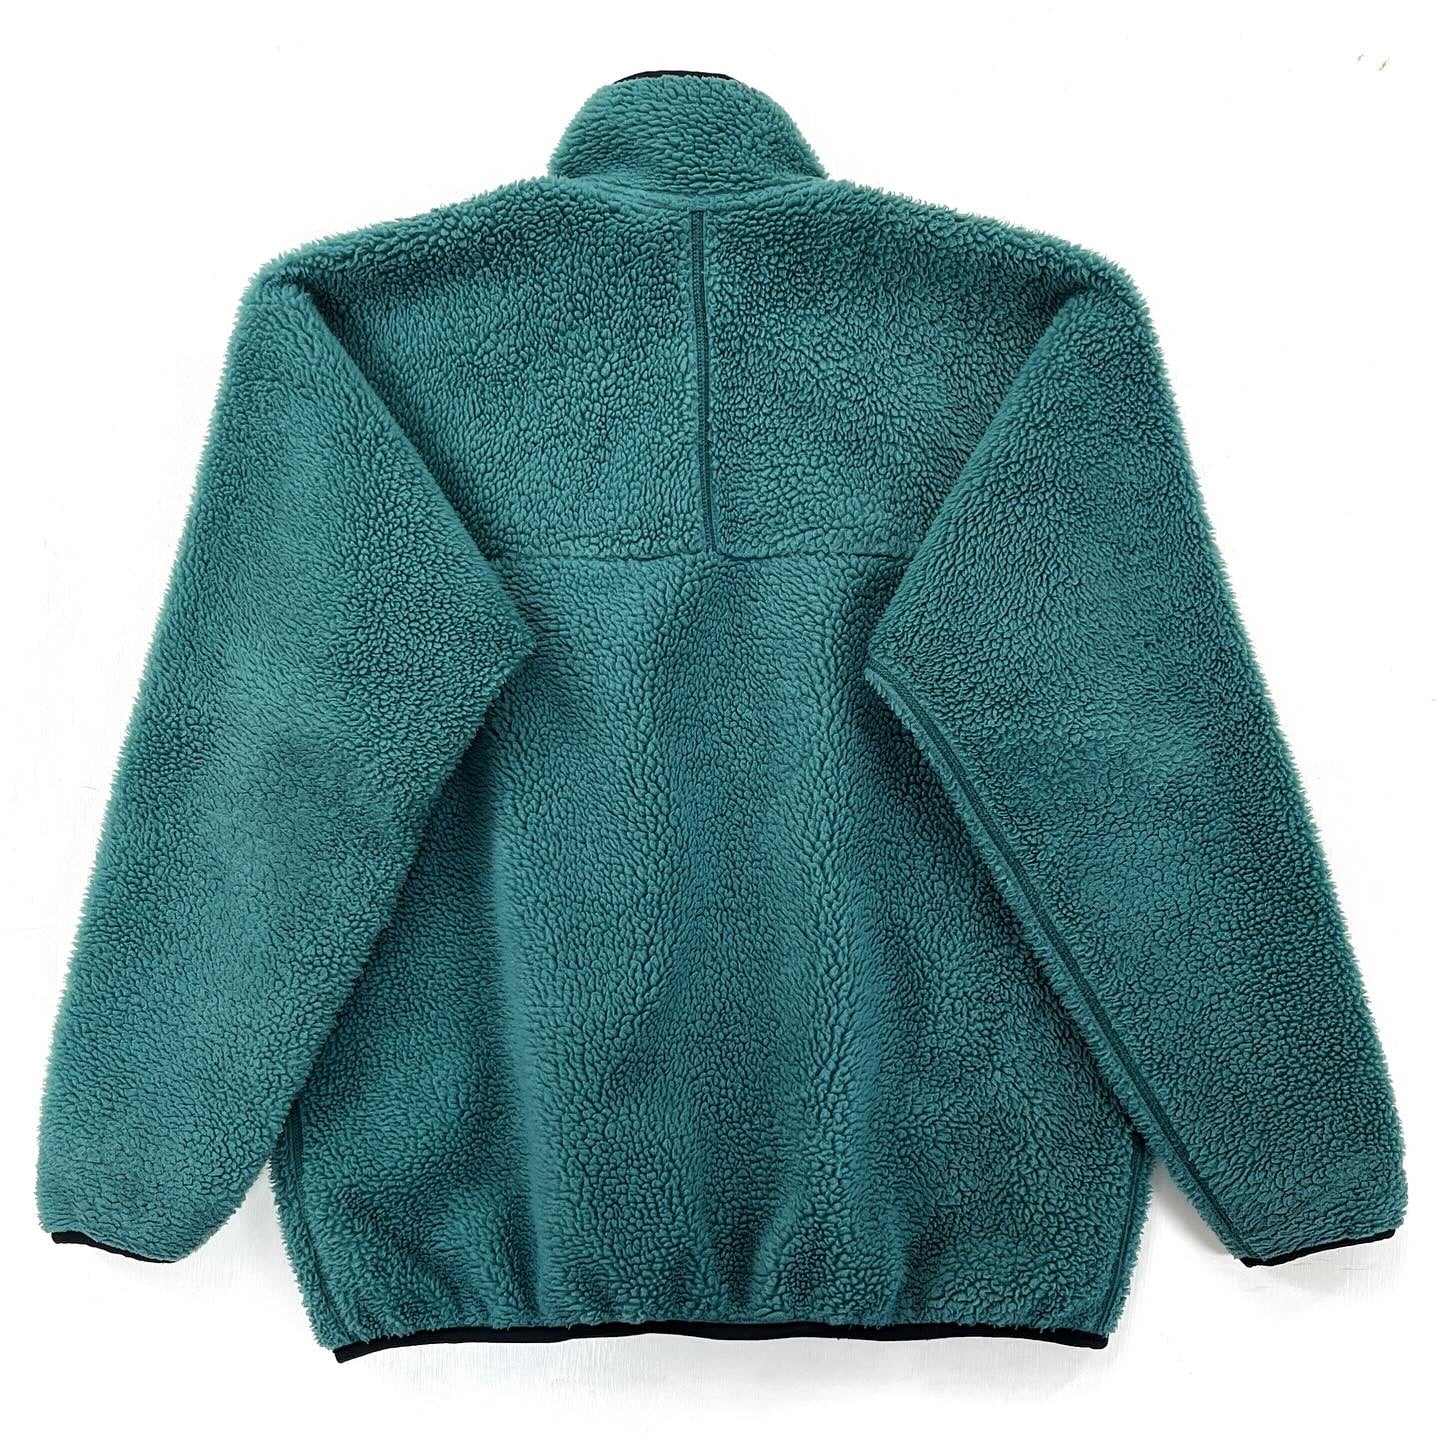 1997 Patagonia Made In The U.S.A. Retro Pile Cardigan, Fir Green (XL)